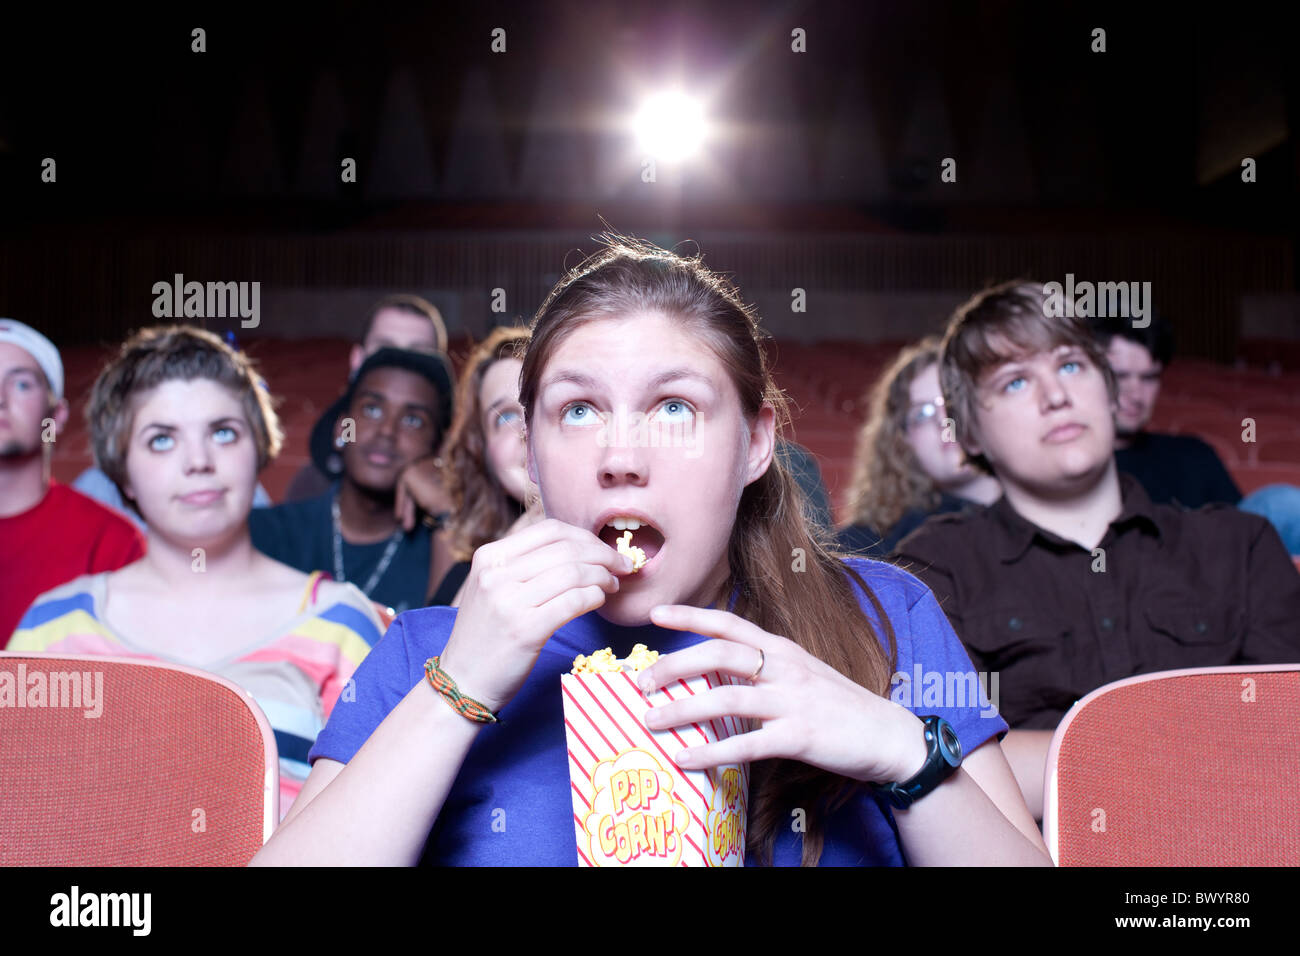 Caucasian woman eating popcorn in movie theater Stock Photo